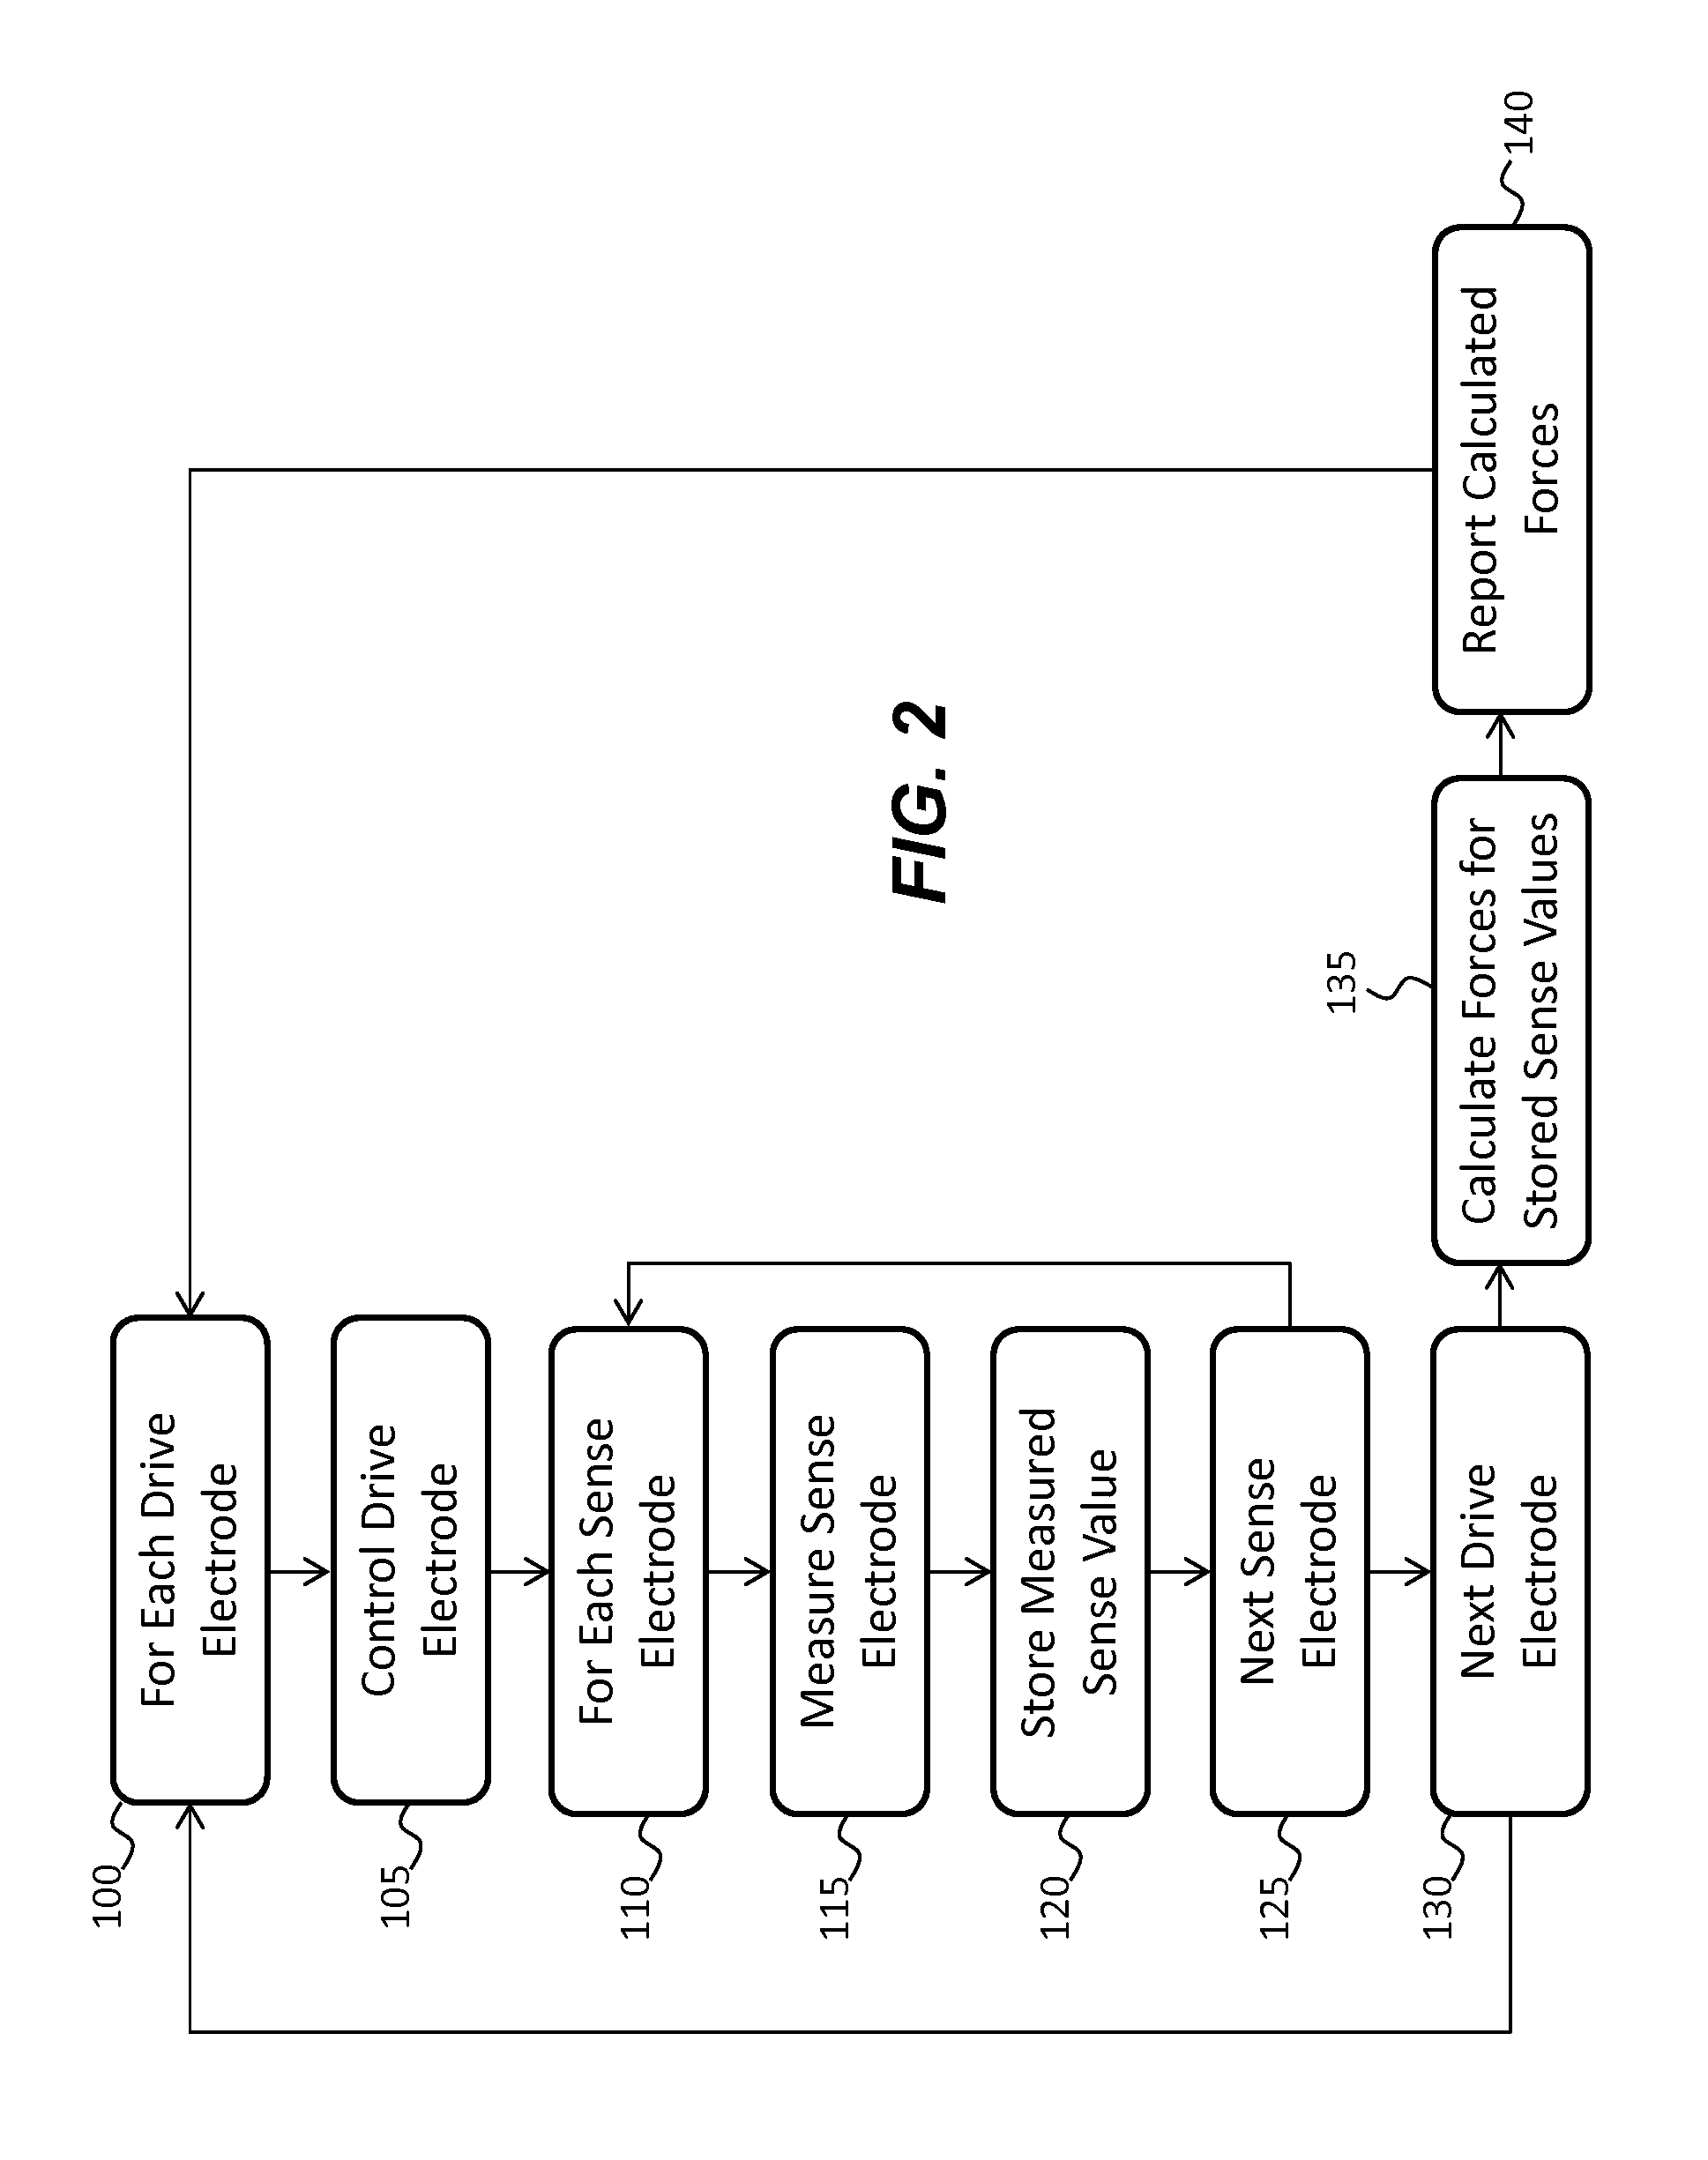 Force detecting method for capacitive touch screen